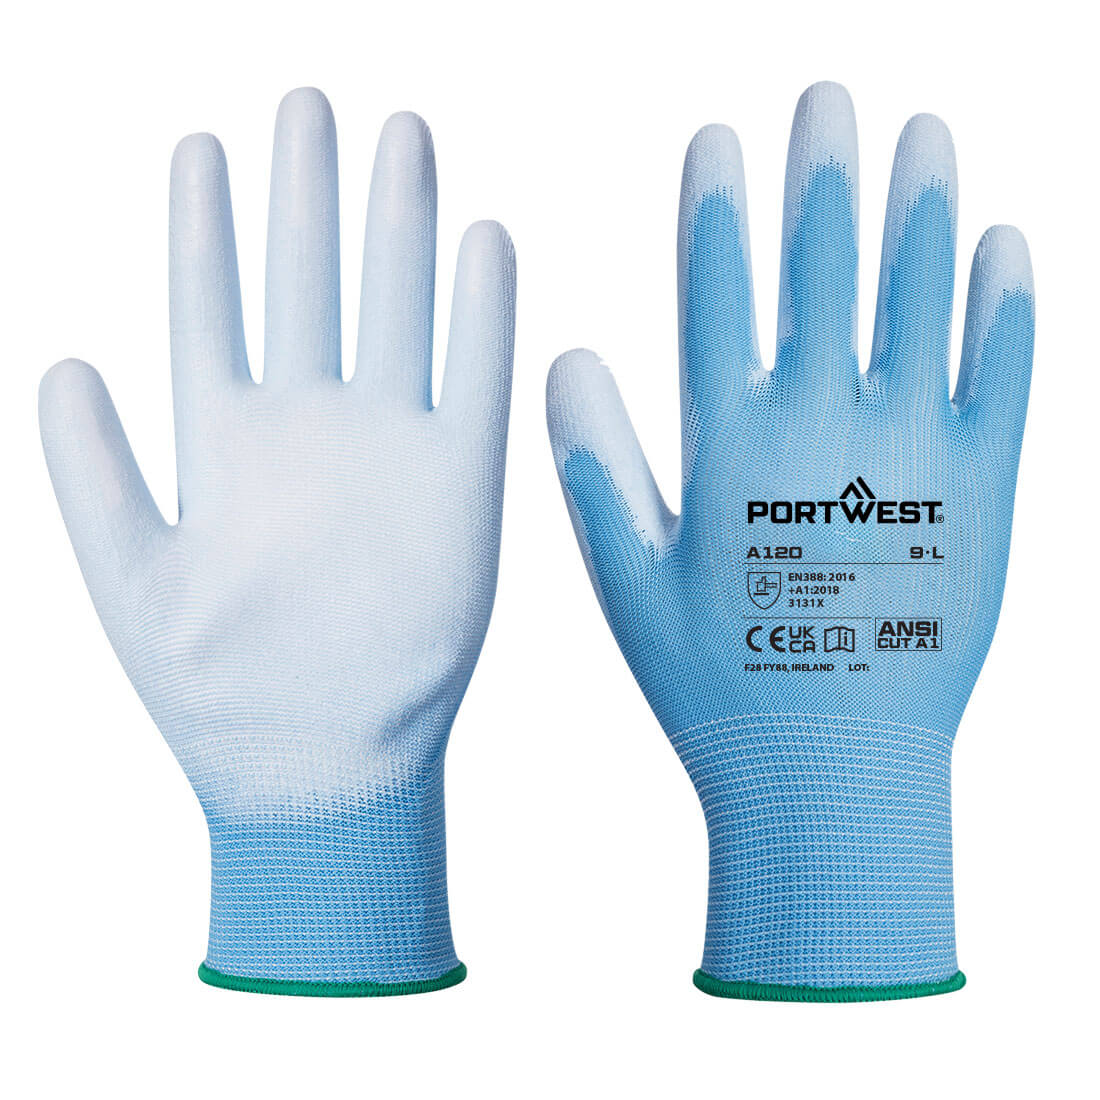 10 PACK PORTWEST GENERAL HANDLING PU PALM GLOVES MANY COLORS SIZES XXS-3XL A120